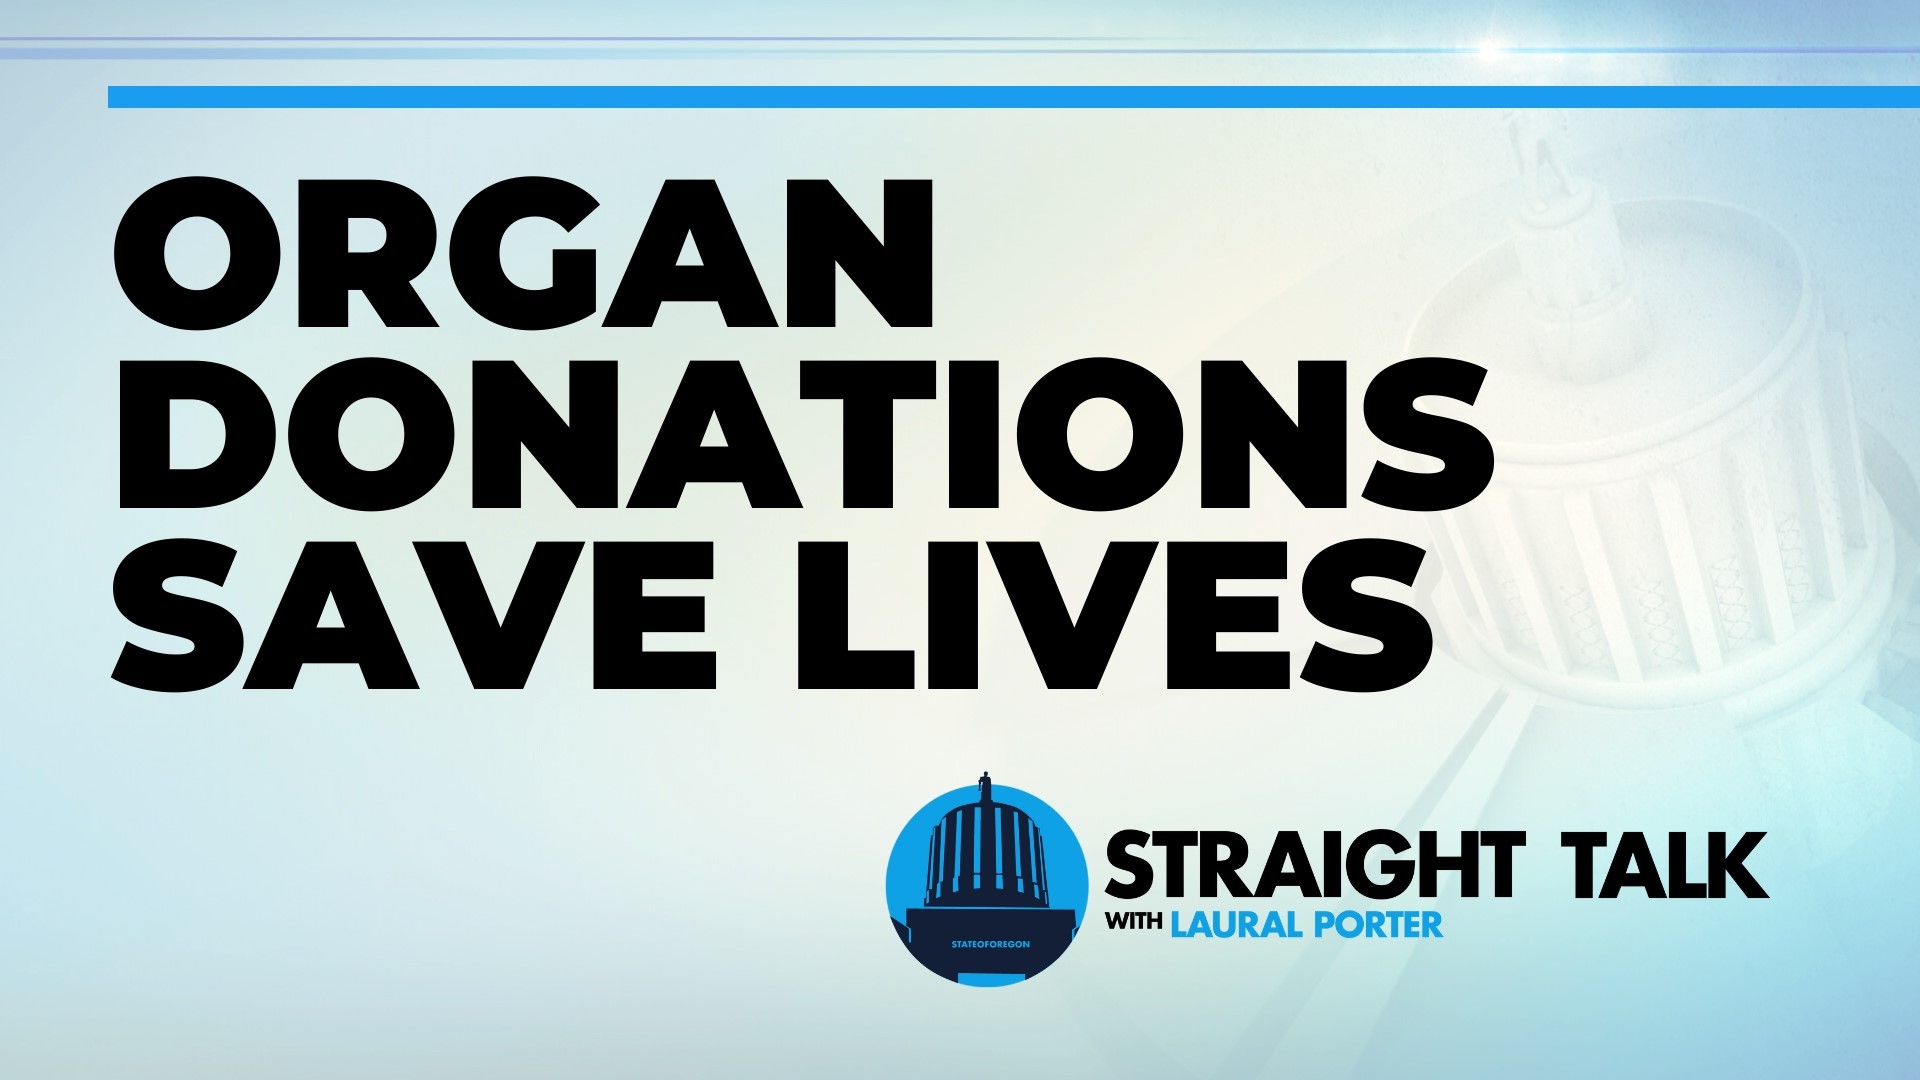 "A Donation Conversation" aims to inspire people to think about registering as organ donors. About 3,000 people in the Pacific Northwest are waiting for transplants.